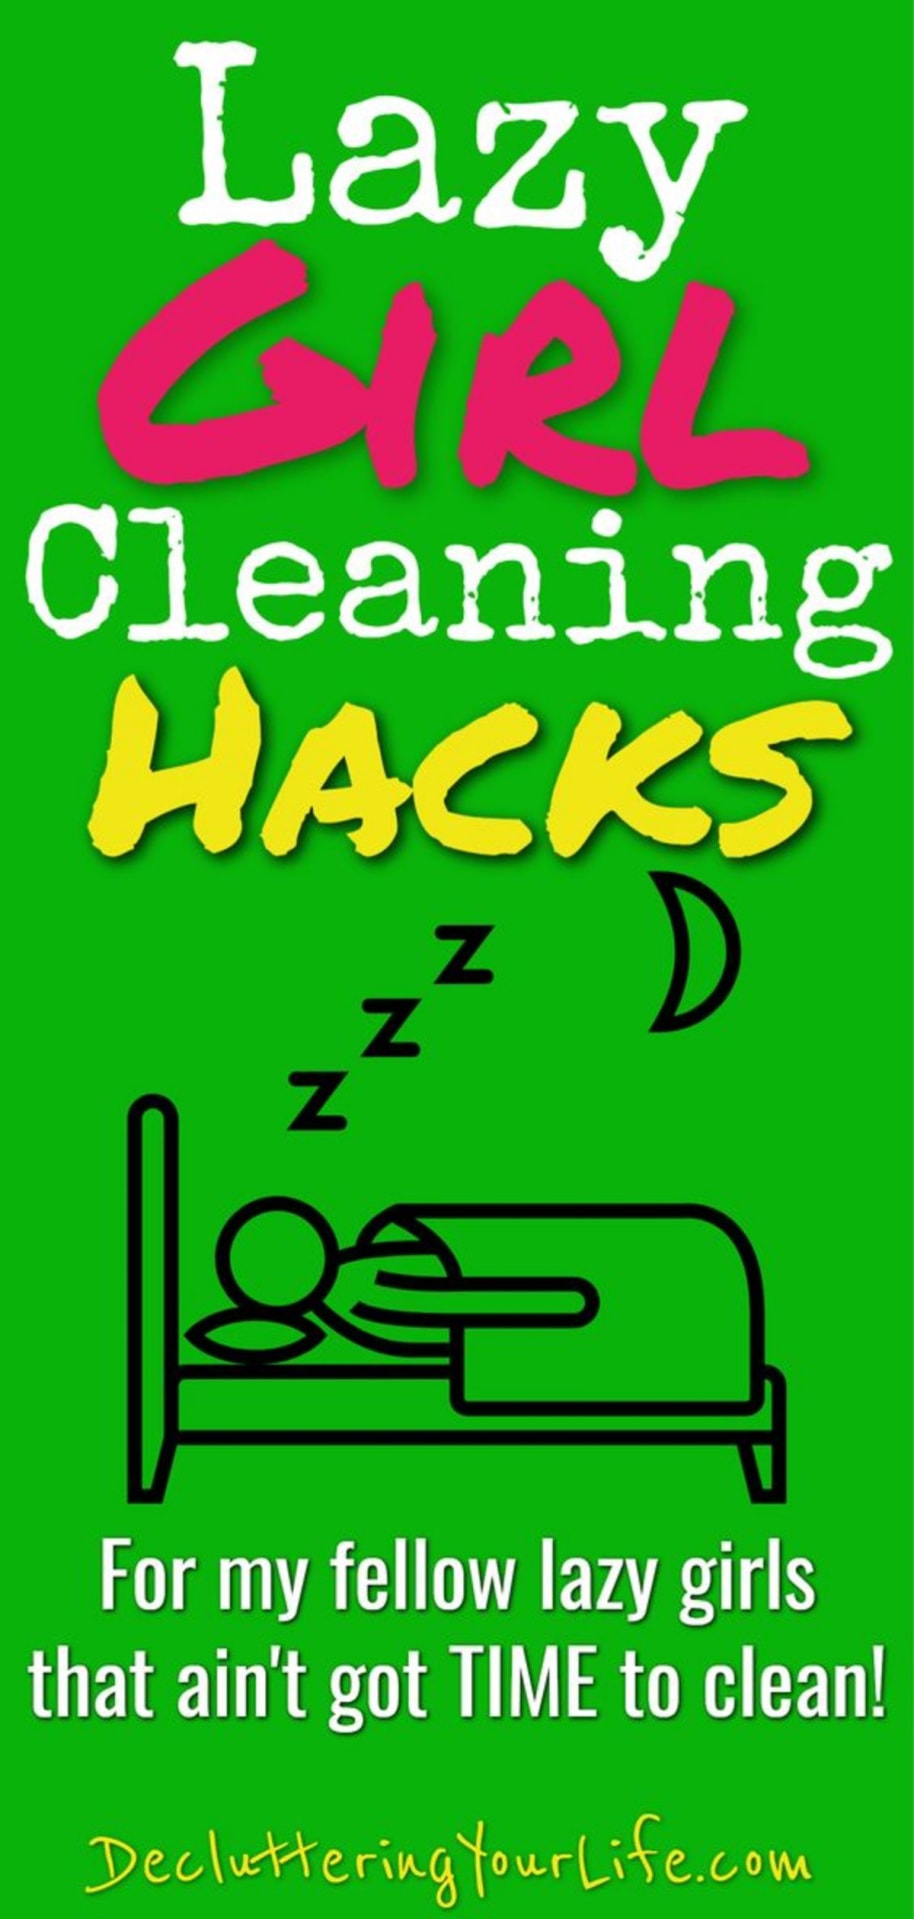 lazy girl cleaning hacks, tips and cheat sheets - useful cleaning life hacks for lazy people